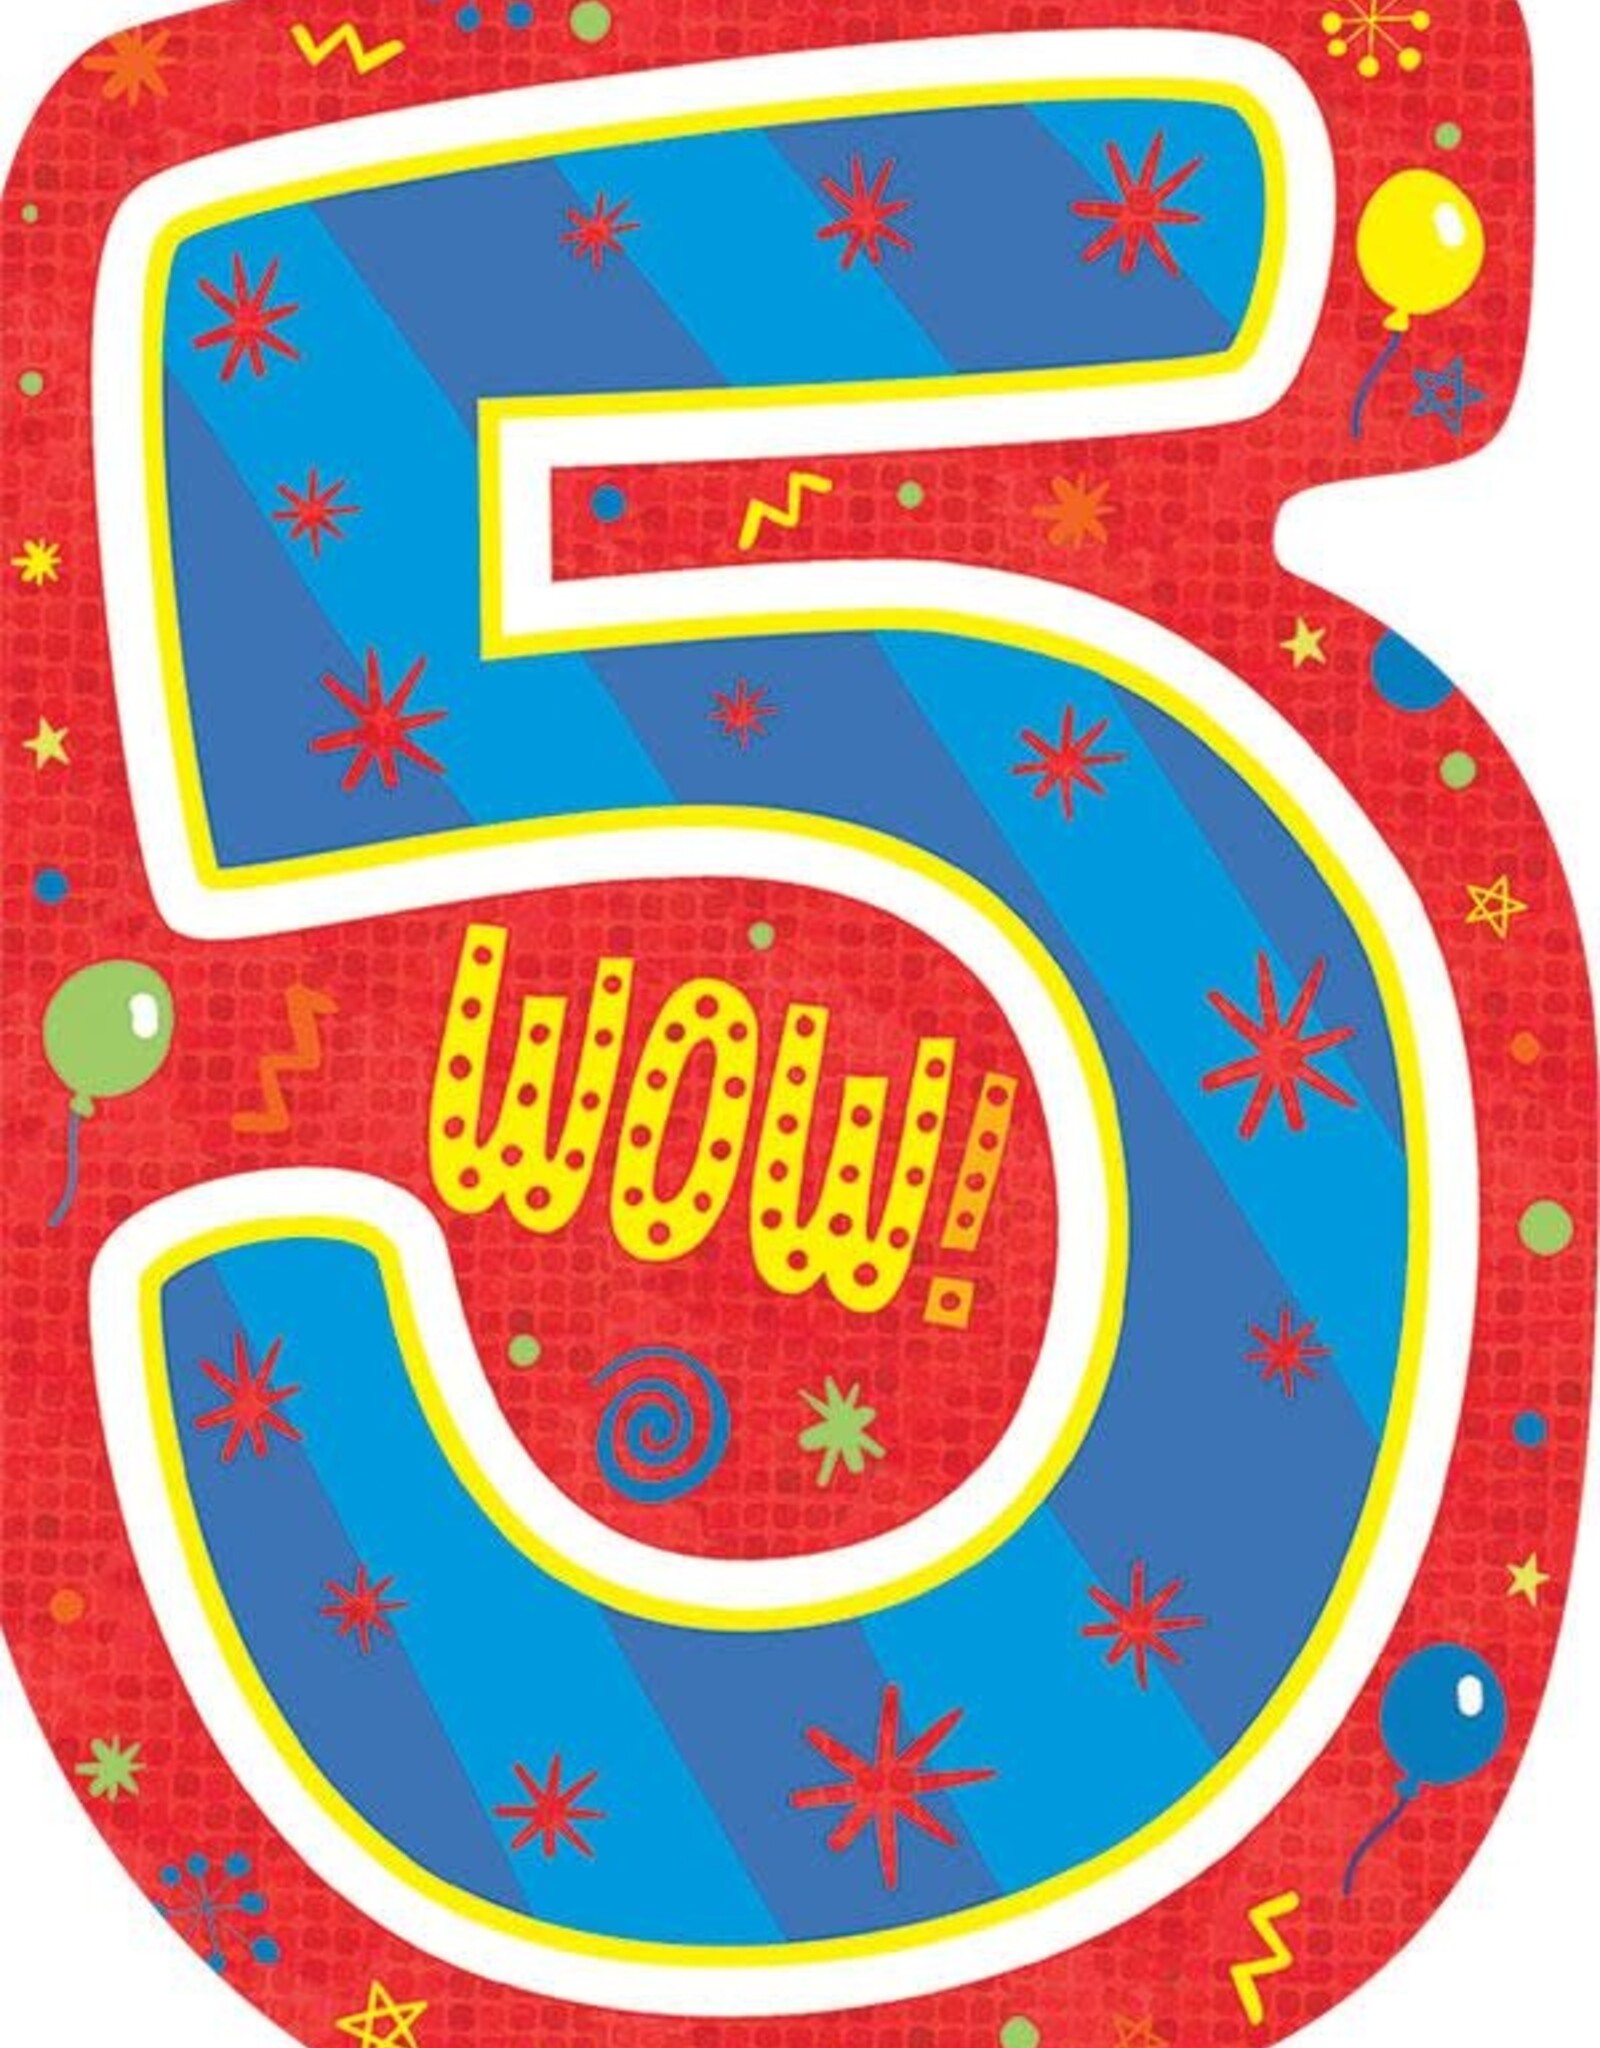 Paper House Foil Card: 5th Birthday